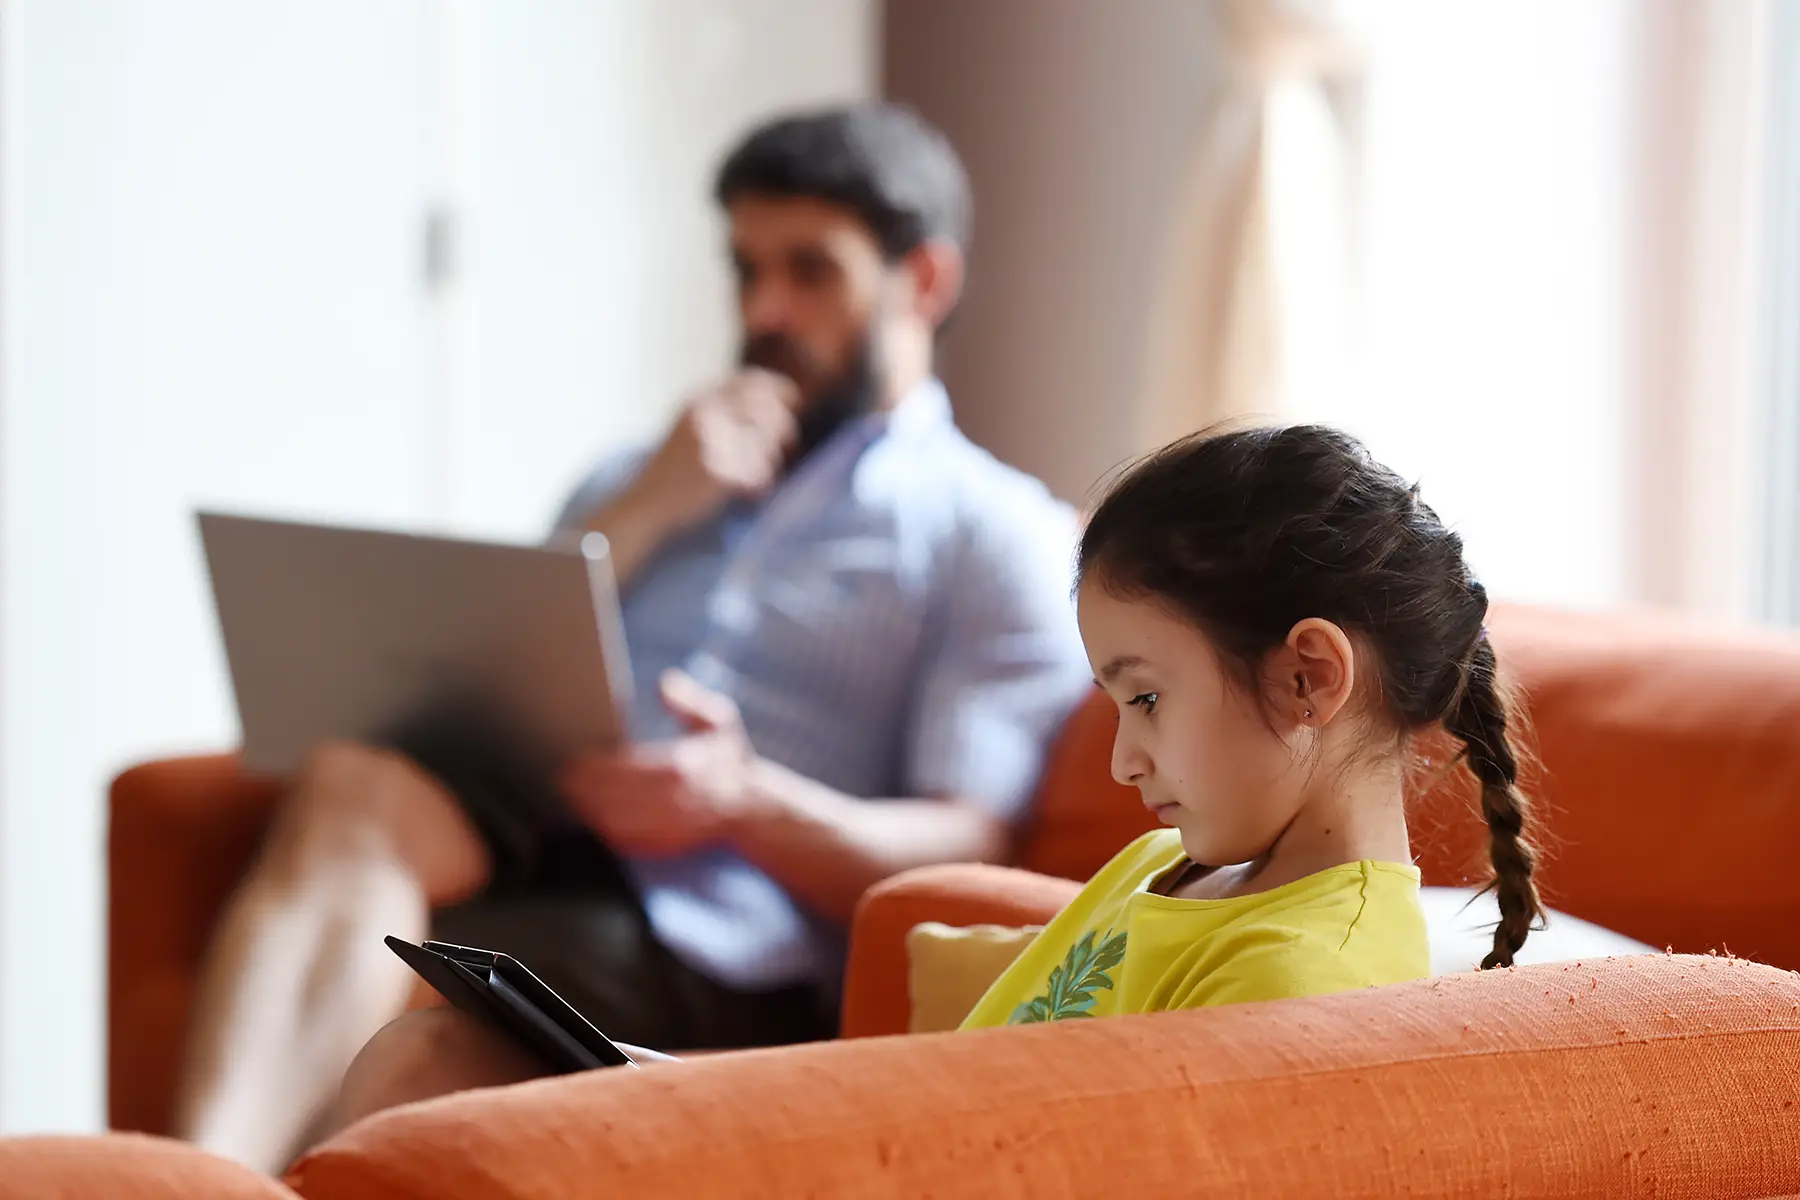 A girl in the foreground sits on the sofa and is looking at a tablet. In the background, out of focus, her father works on a laptop.